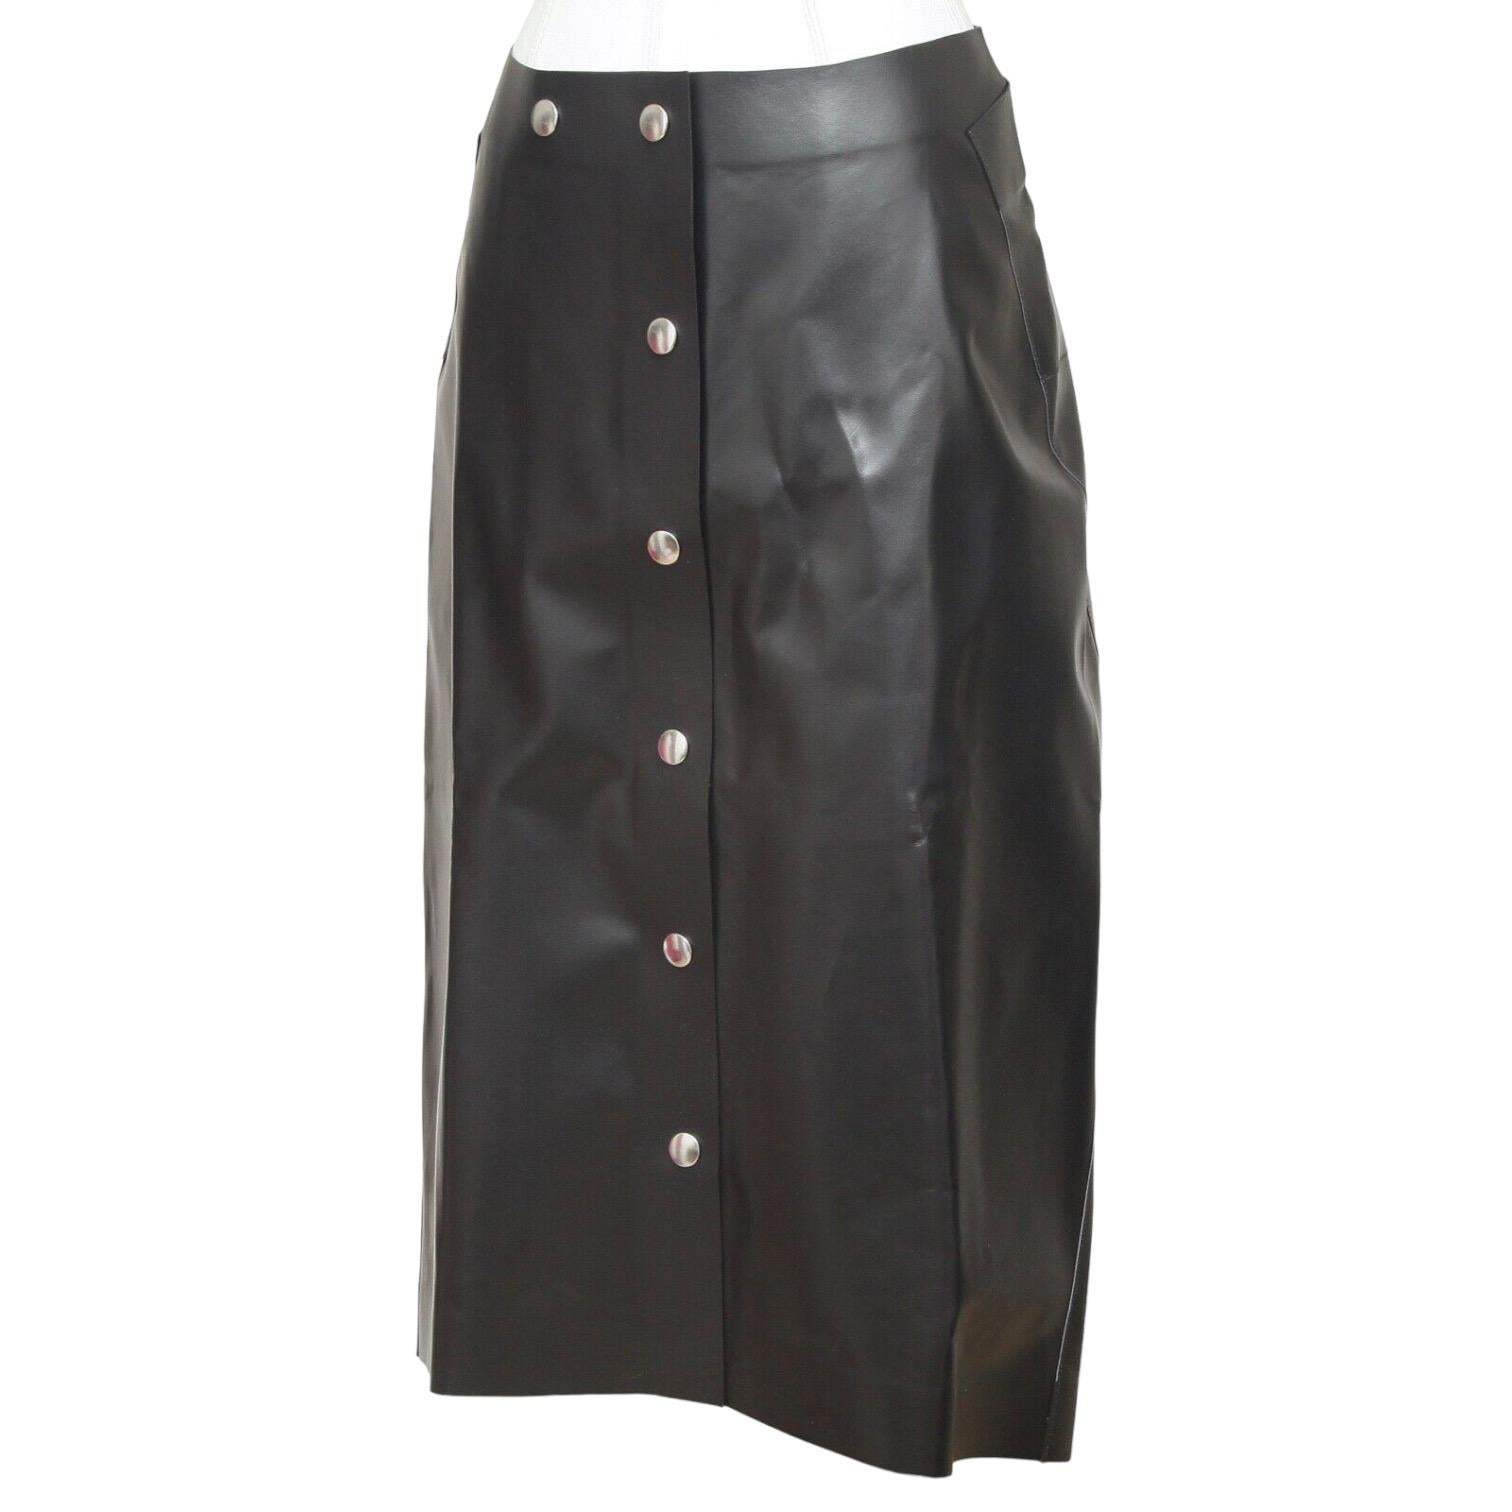 GUARANTEED AUTHENTIC VICTORIA BECKHAM BLACK LEATHER SKIRT BNWT

Retail excluding sales taxes $1,990

Design:
- Black leather mid length skirt.
- Higher waisted.
- Silver-tone front snap closure.
- Slightly longer in the back.
- Beautiful!

Fabric: